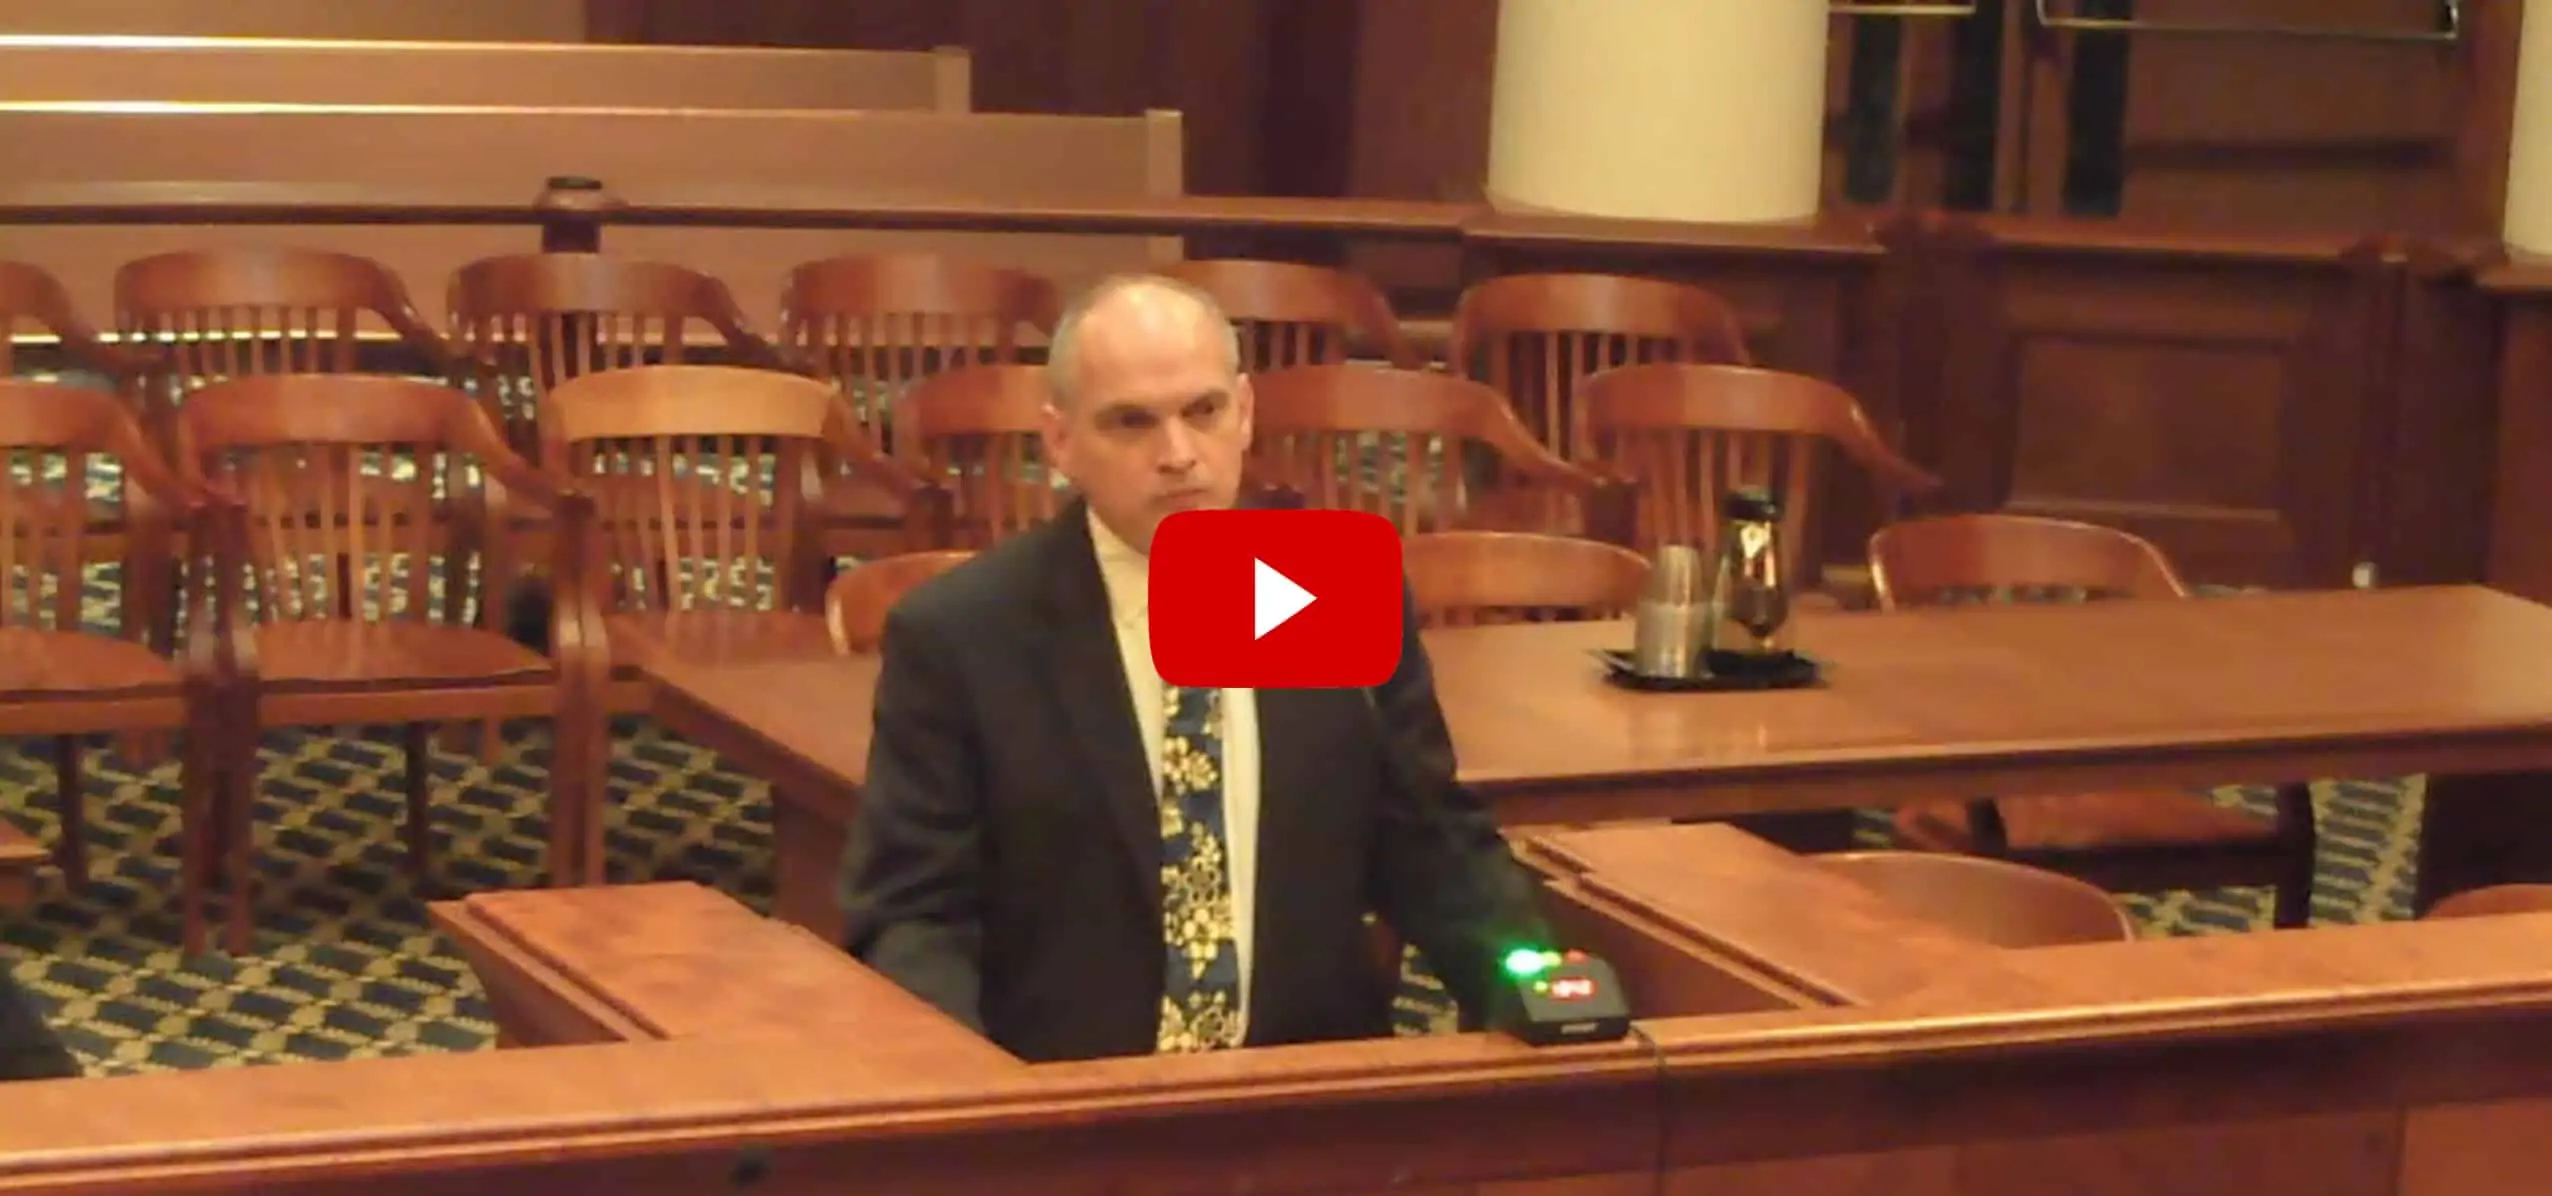 This is a short video of a recent case hearing